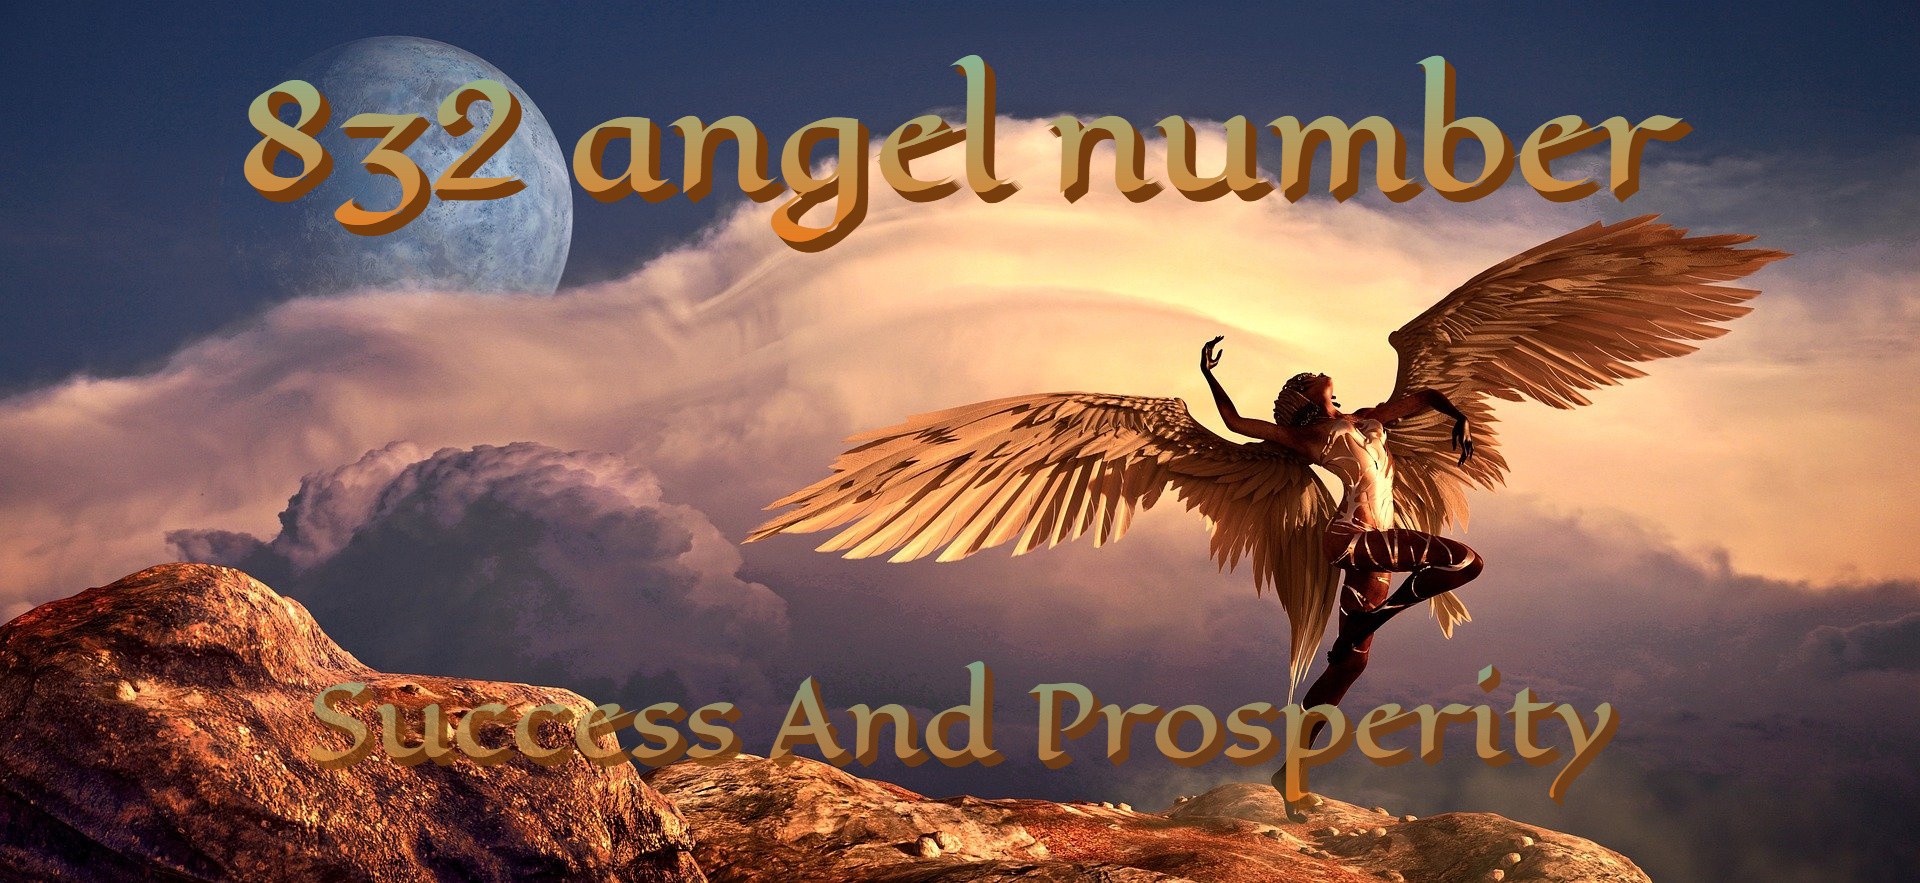 832 Angel Number Symbolism - Success And Prosperity